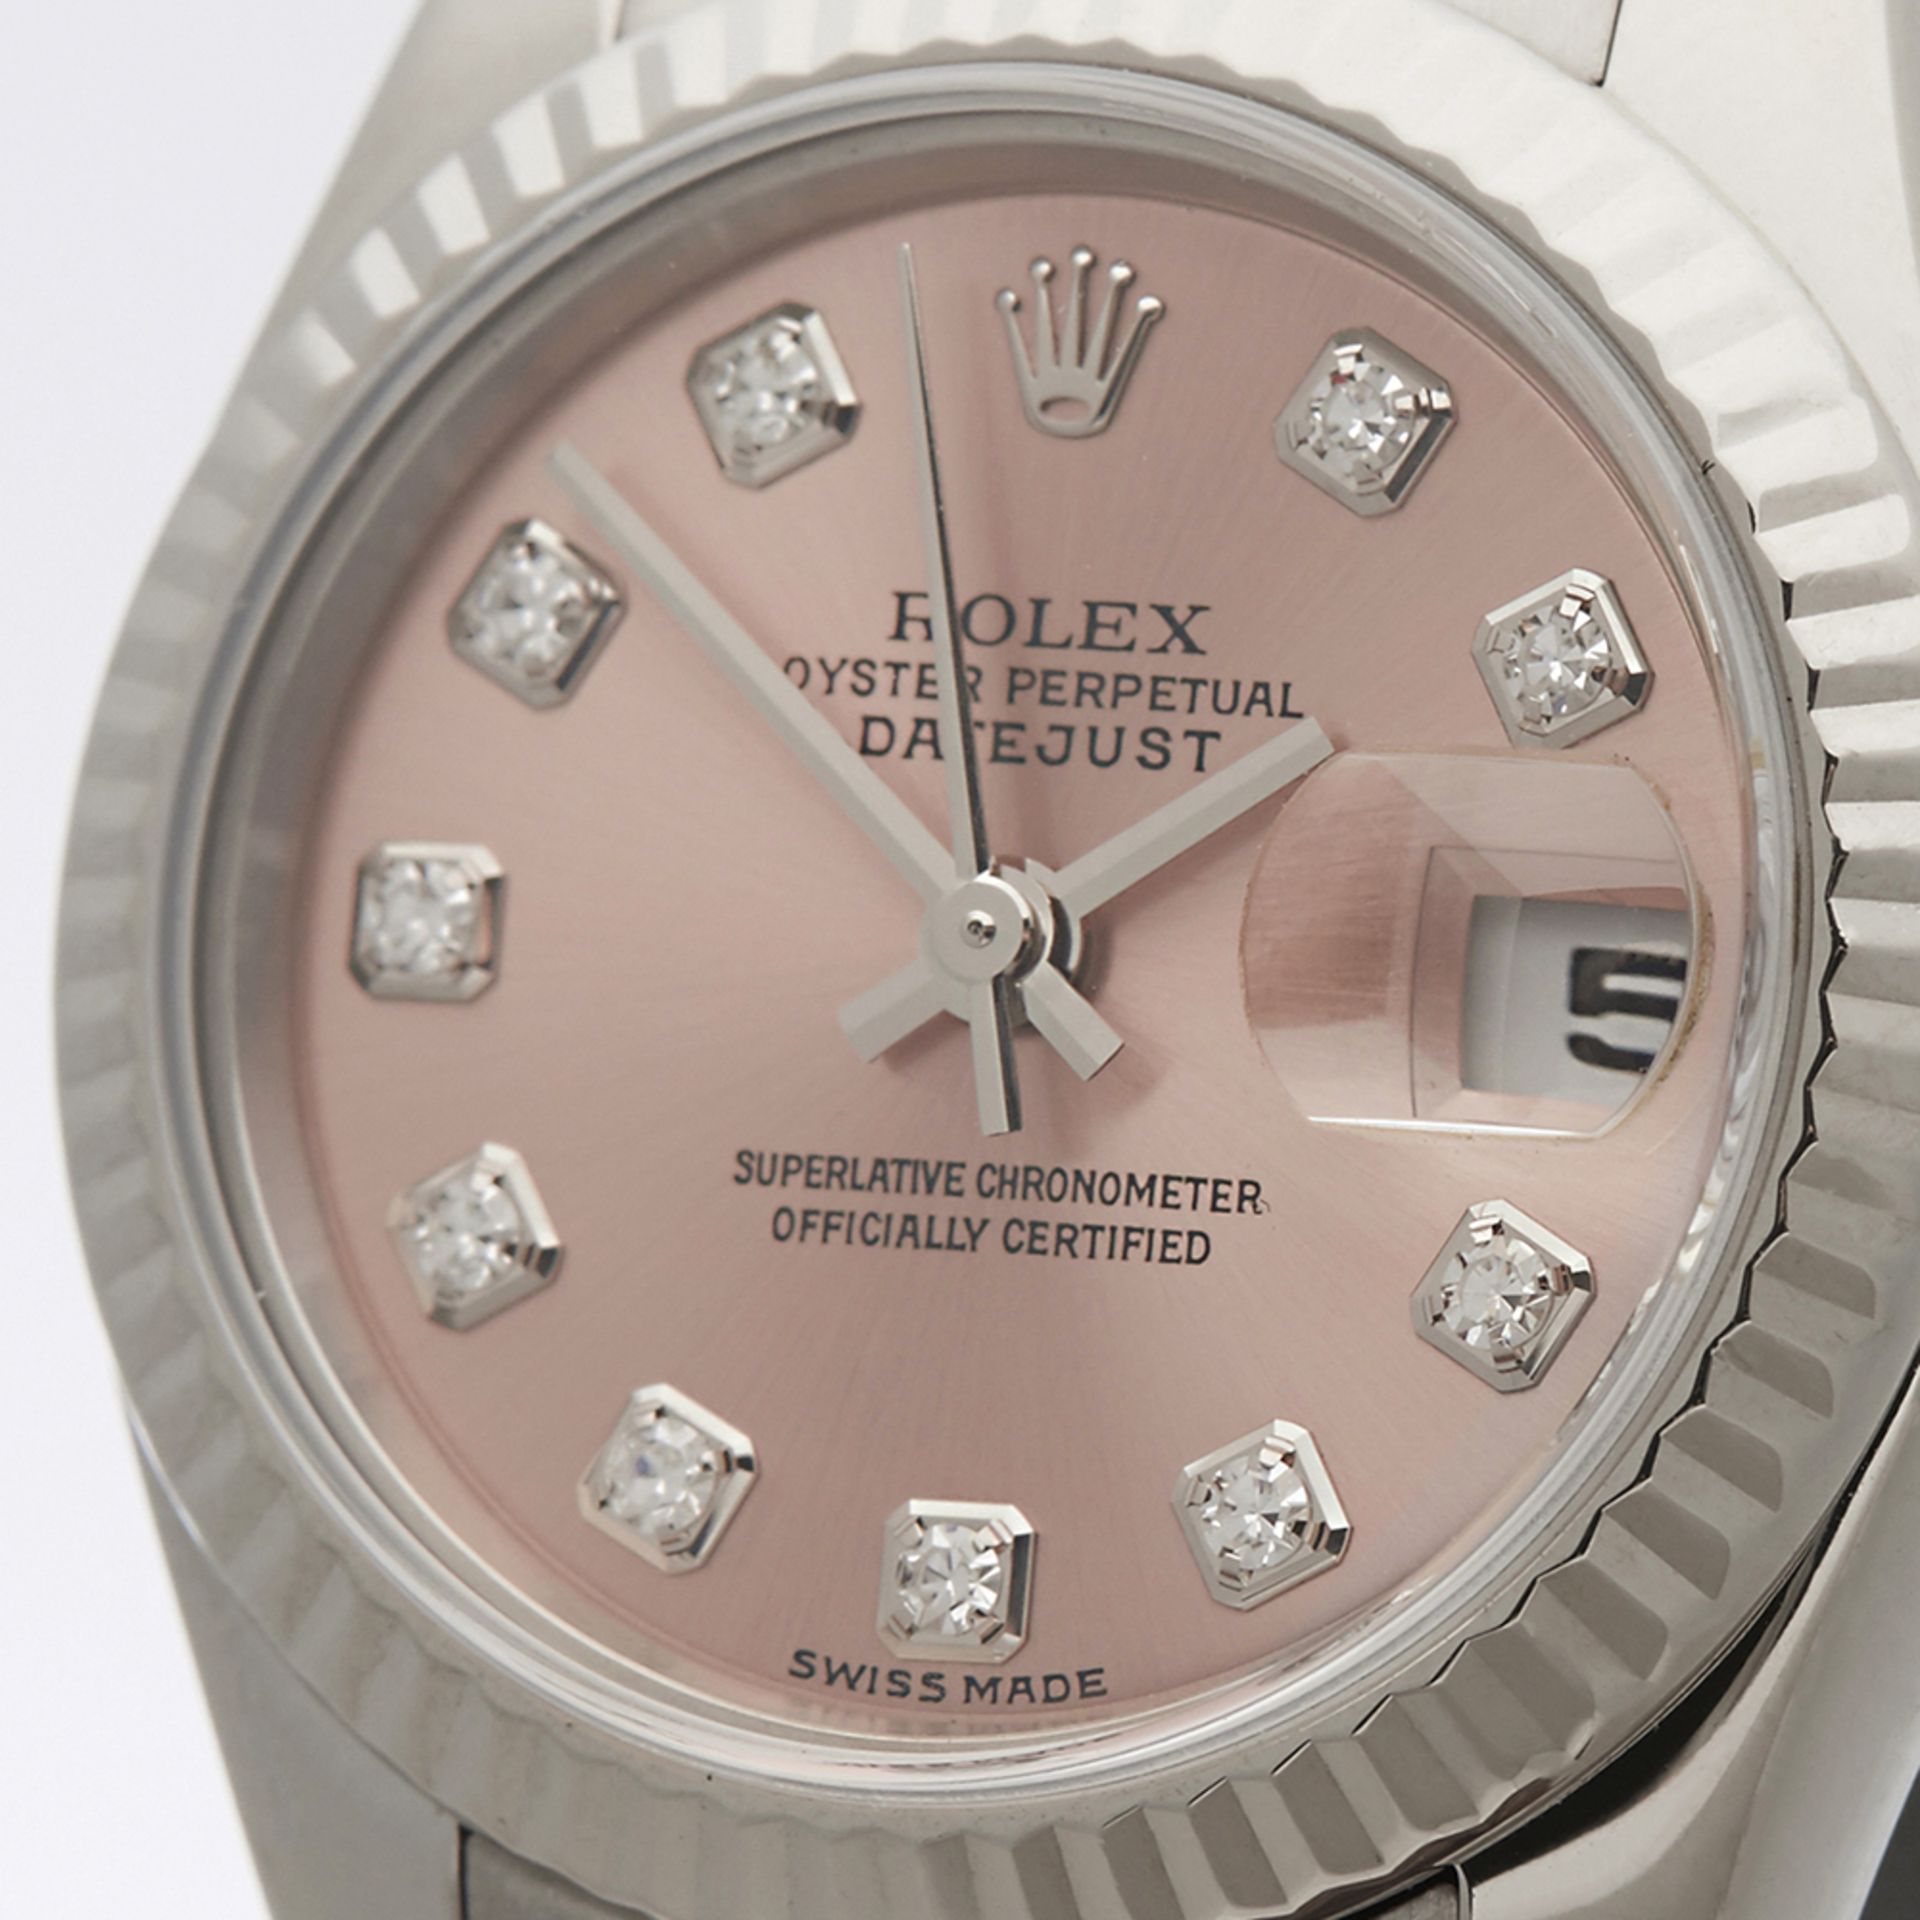 Datejust 26mm 18k White Gold - 179179 - Image 3 of 9